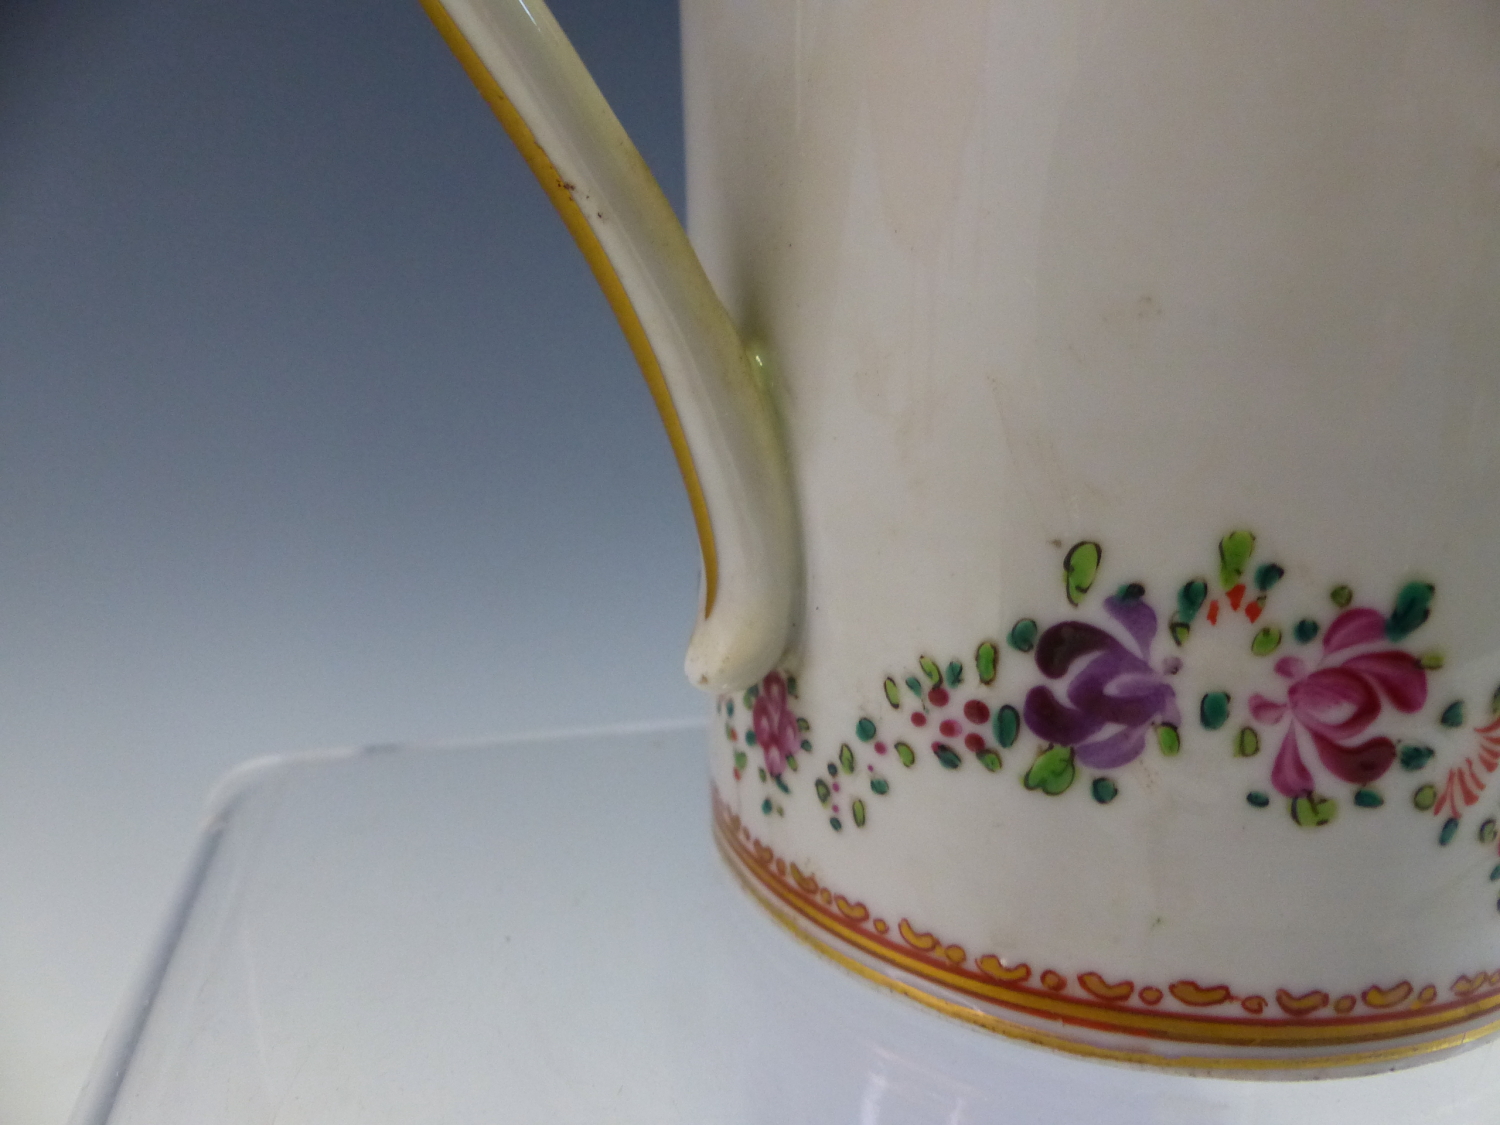 A LATE 19th C. CHINESE EXPORT SSTYLE CYLINDRICAL MUG, THE SWAGS OF FLOWERS ABOVE AND BELOW THE - Image 5 of 7